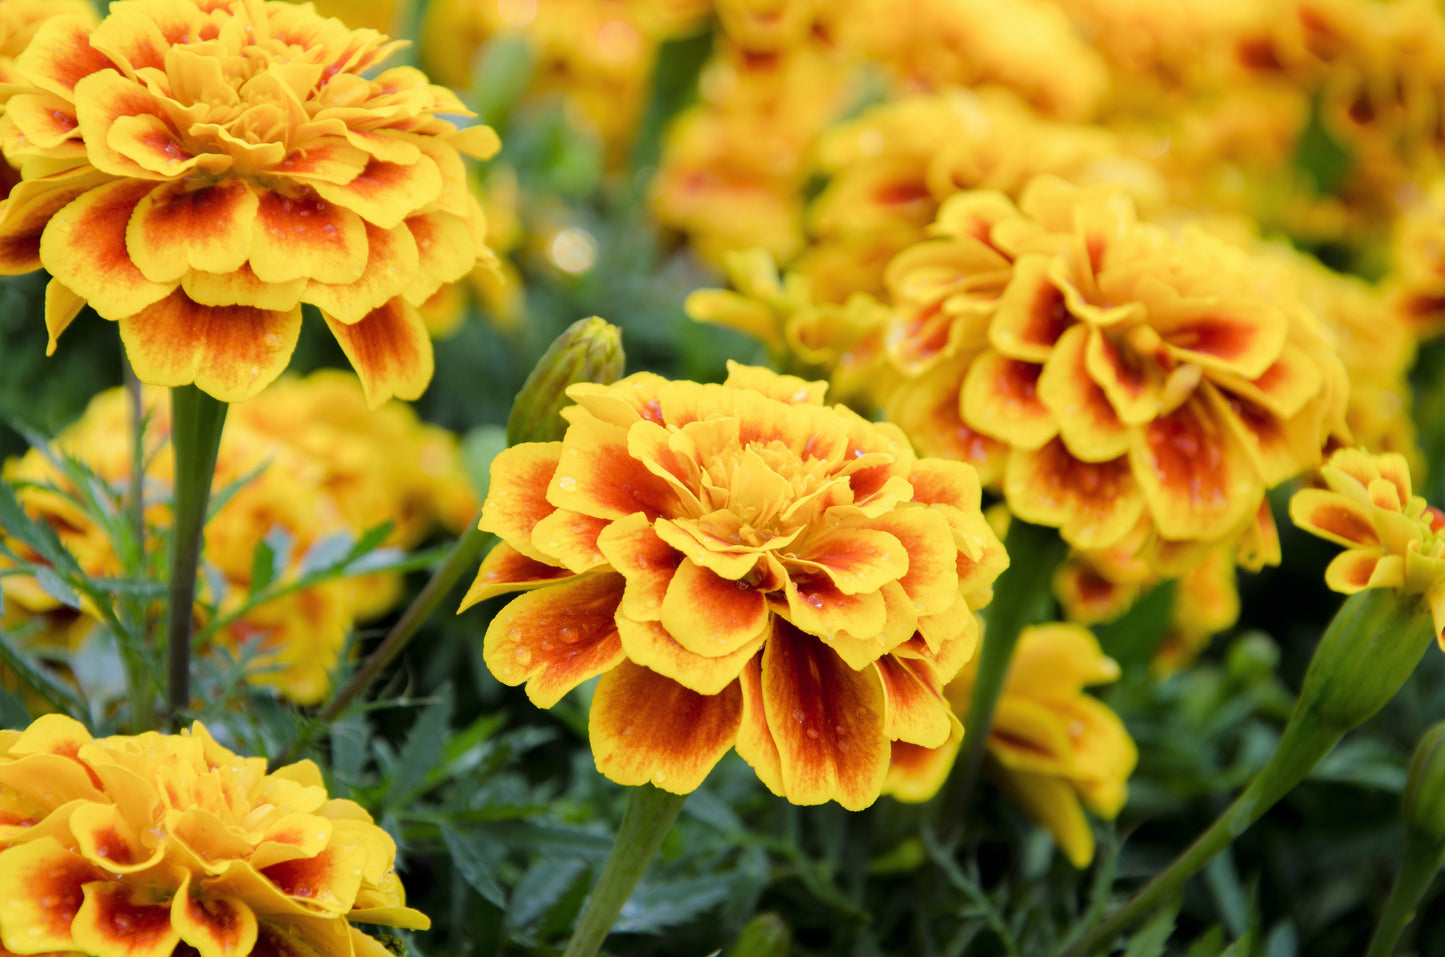 400 FRENCH MARIGOLD SPARKY Mixed Colors Tagetes Patula Orange Yellow Red Flower Seeds